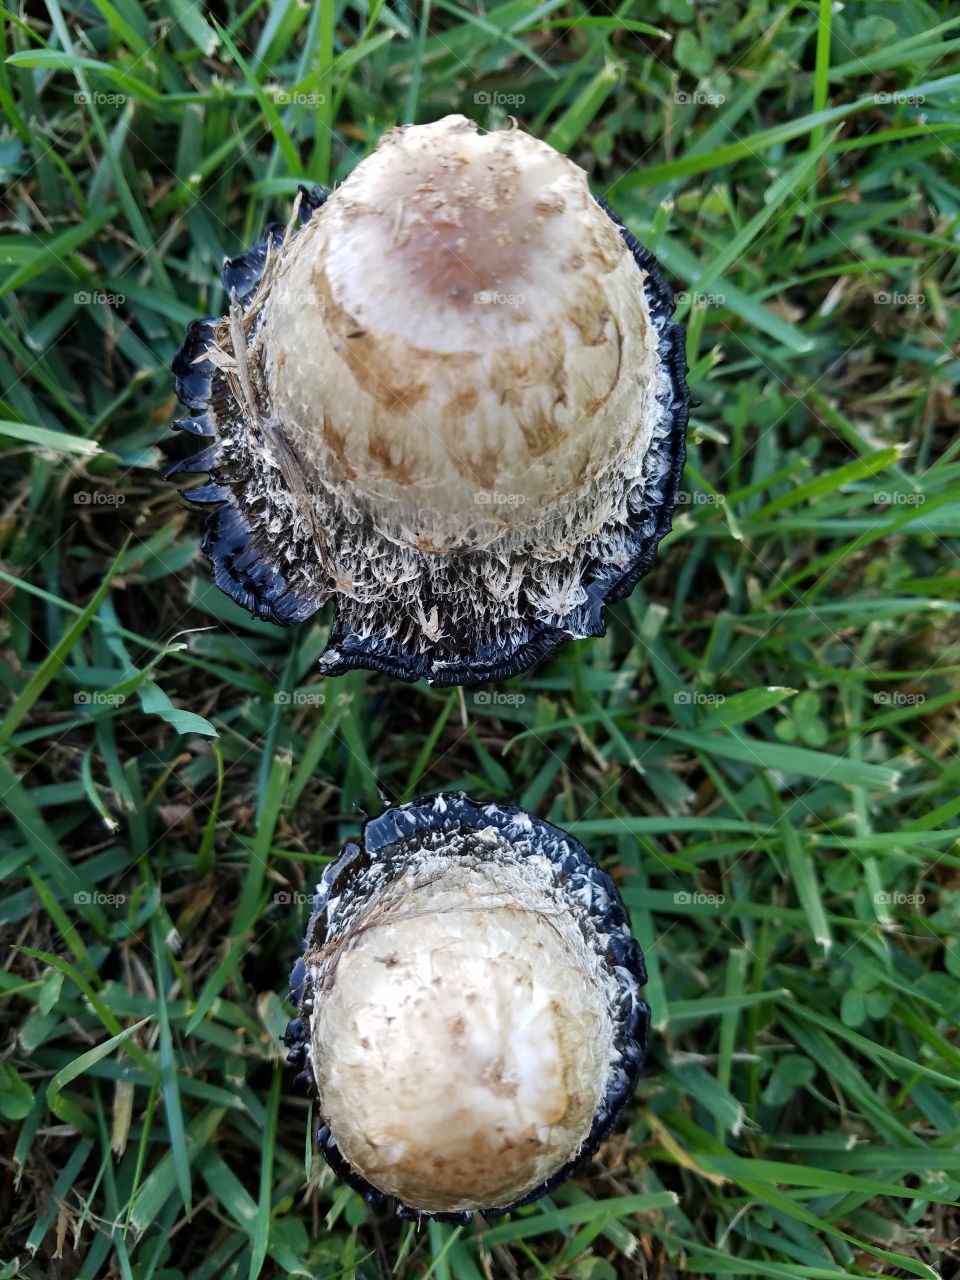 The tops of two mushrooms